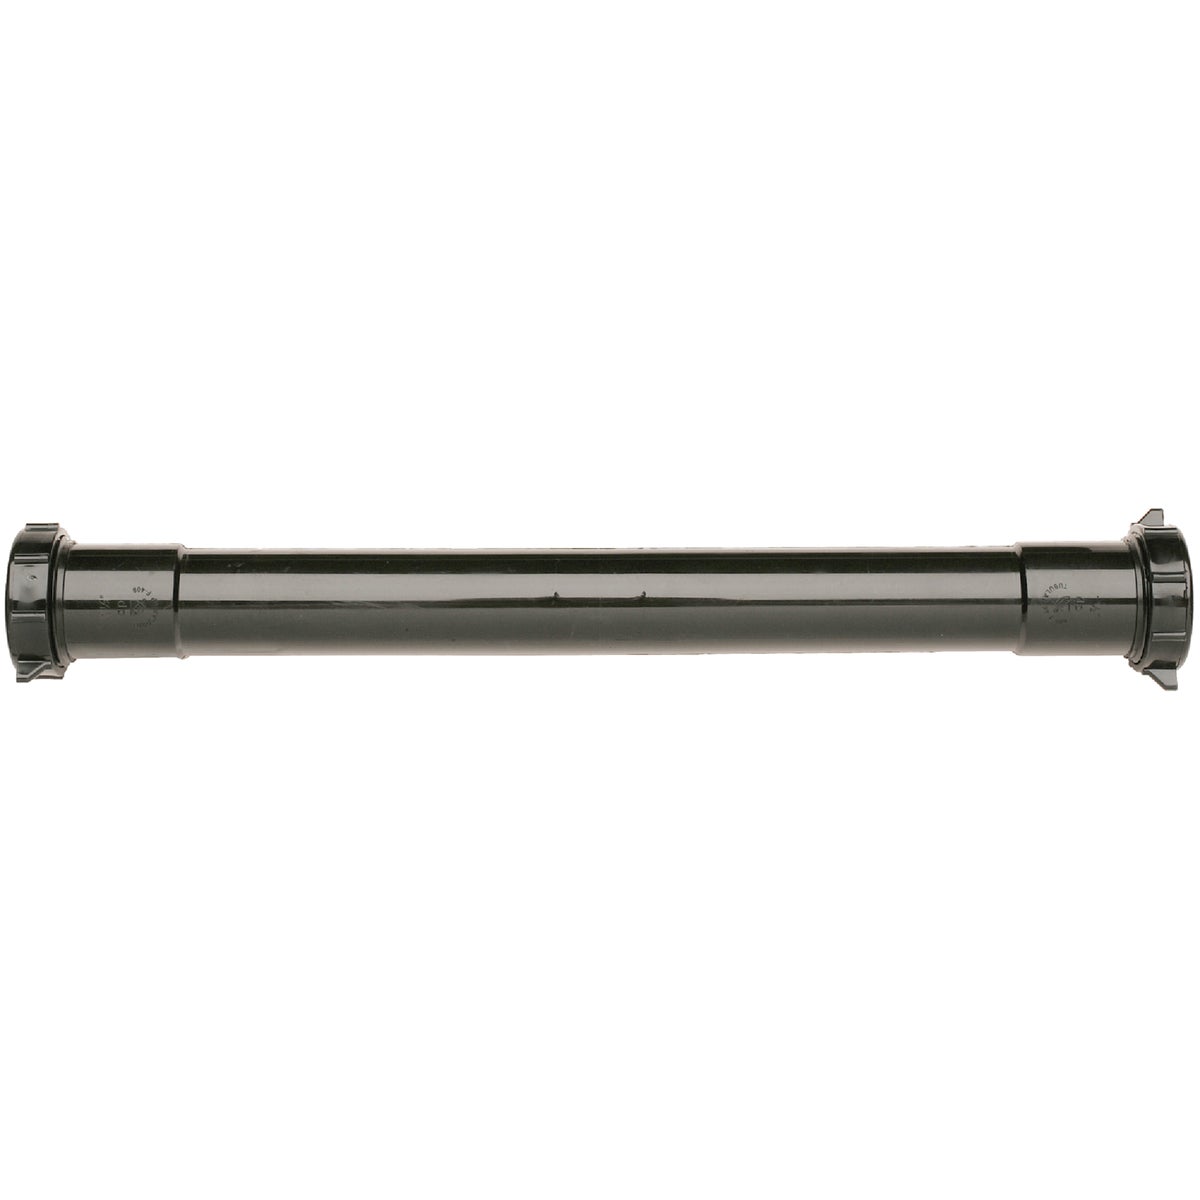 Item 495190, 1-1/2" x 16". Double ended with nuts and washers. Slip-joint.